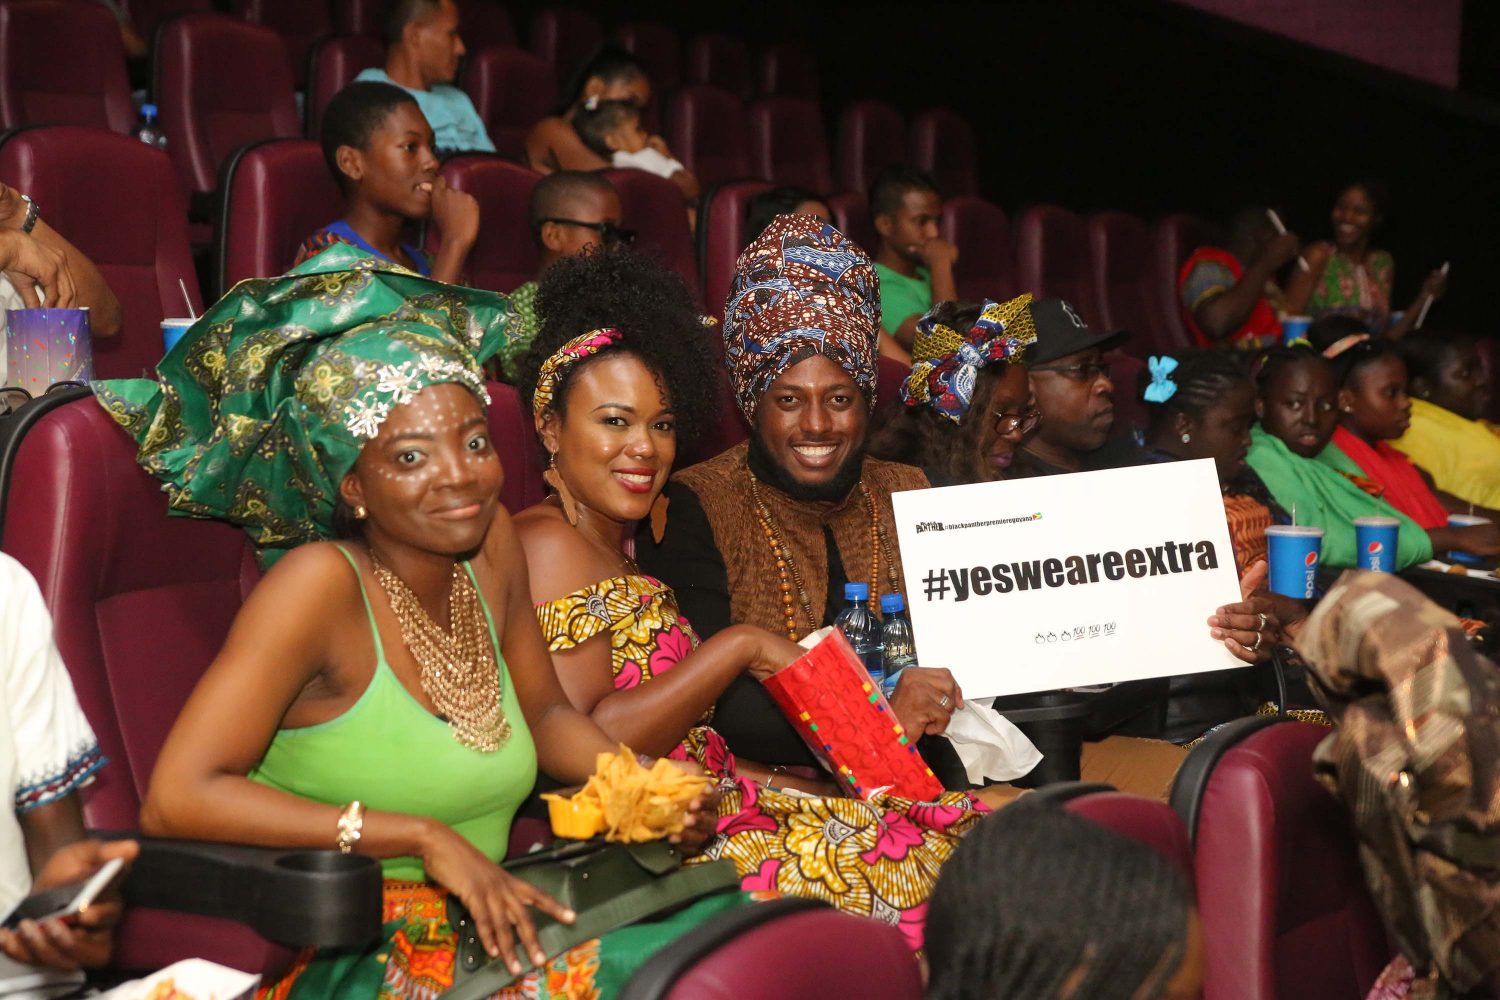 In defiance of critics who have declared responses to the movie as “too extra” these fans, part of a 60 person contingent from the African Cultural and Development Association (ACDA), owned their response and declared “#yesweareextra”